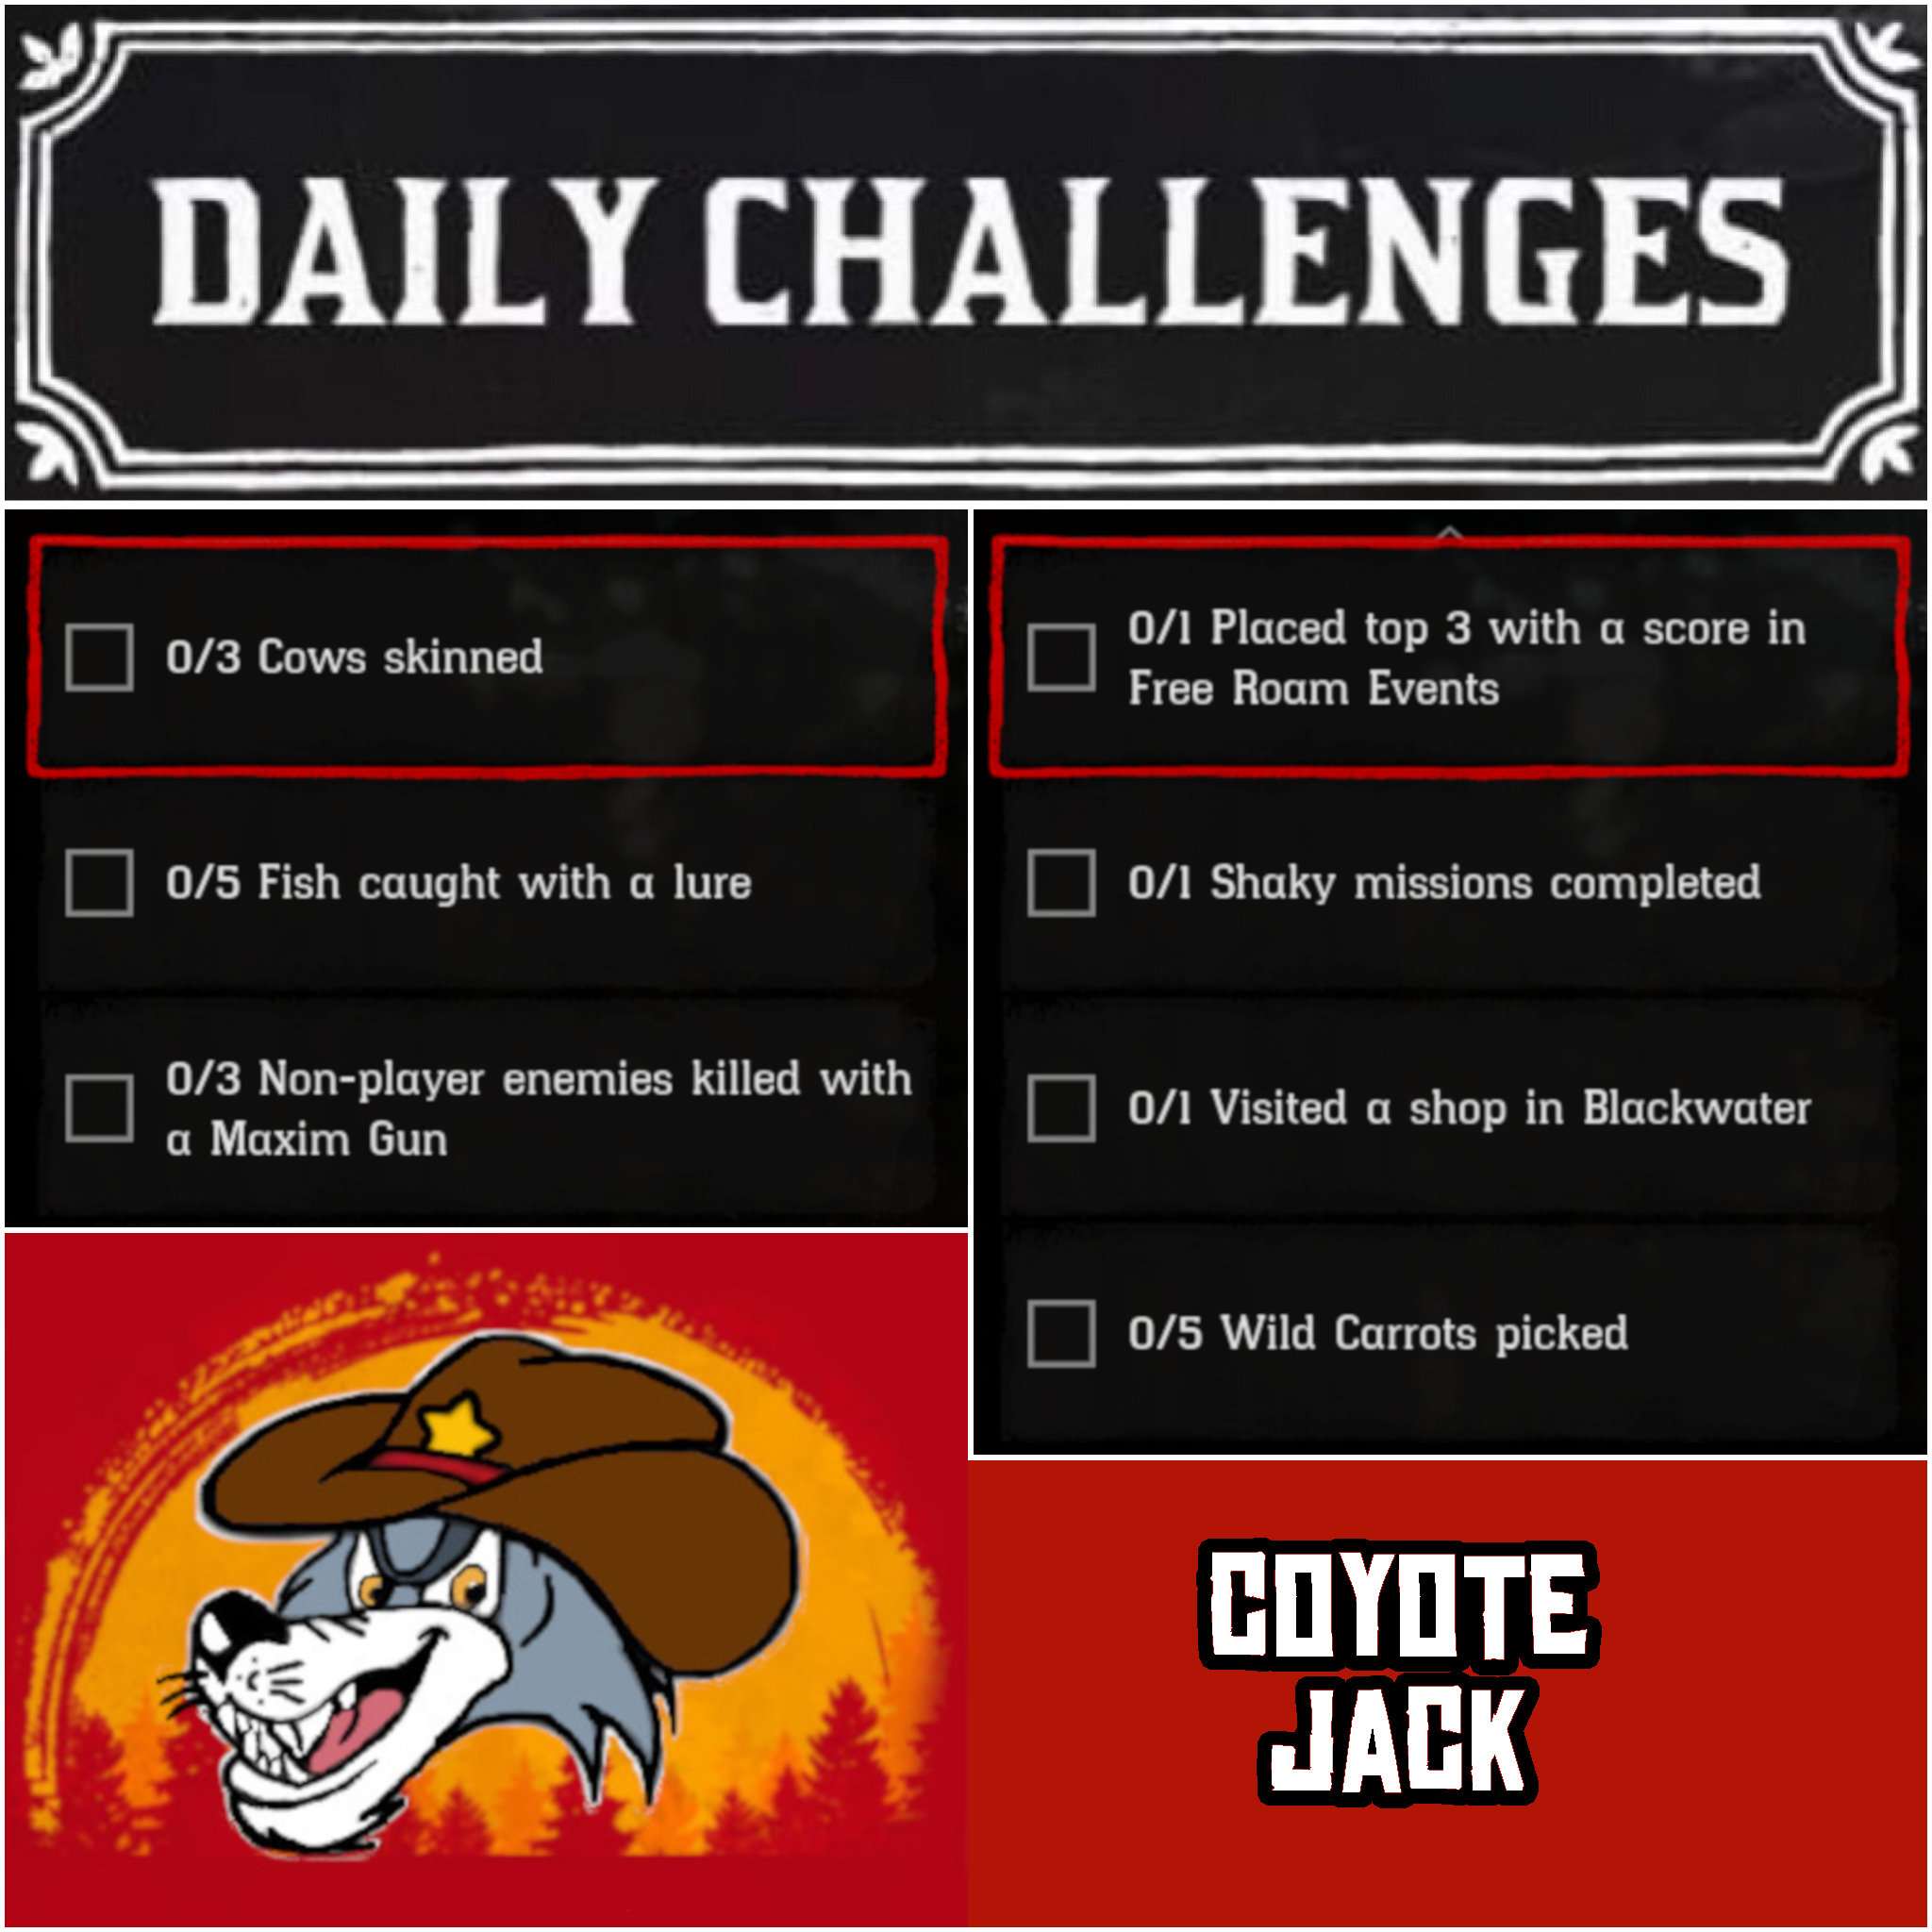 You are currently viewing Monday 09 November Daily Challenges